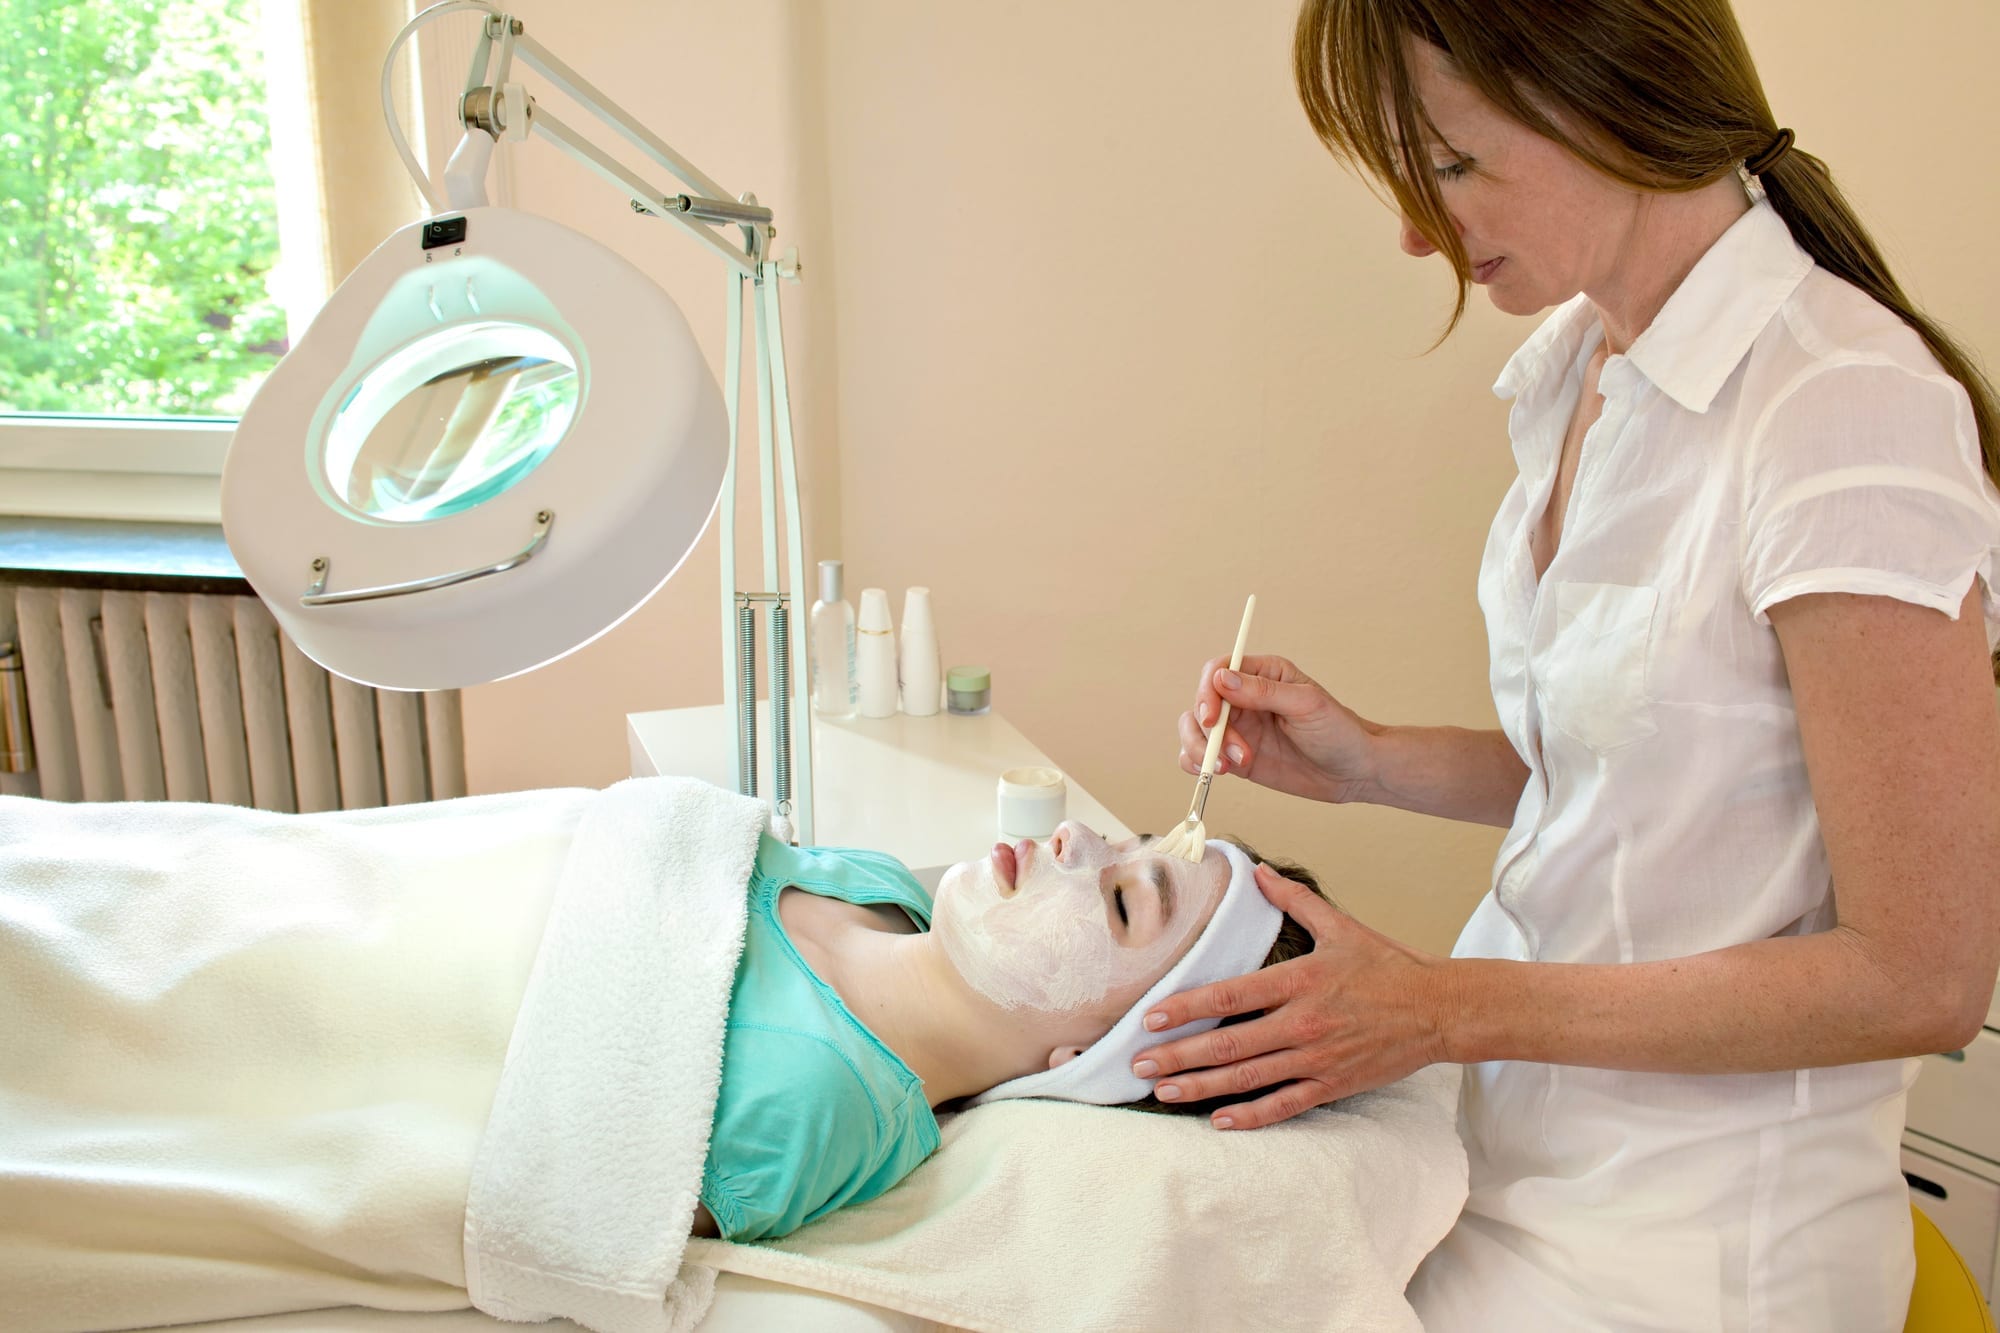 Alternative practitioner applying a chemical peel to a female patient's face in a beauty clinic